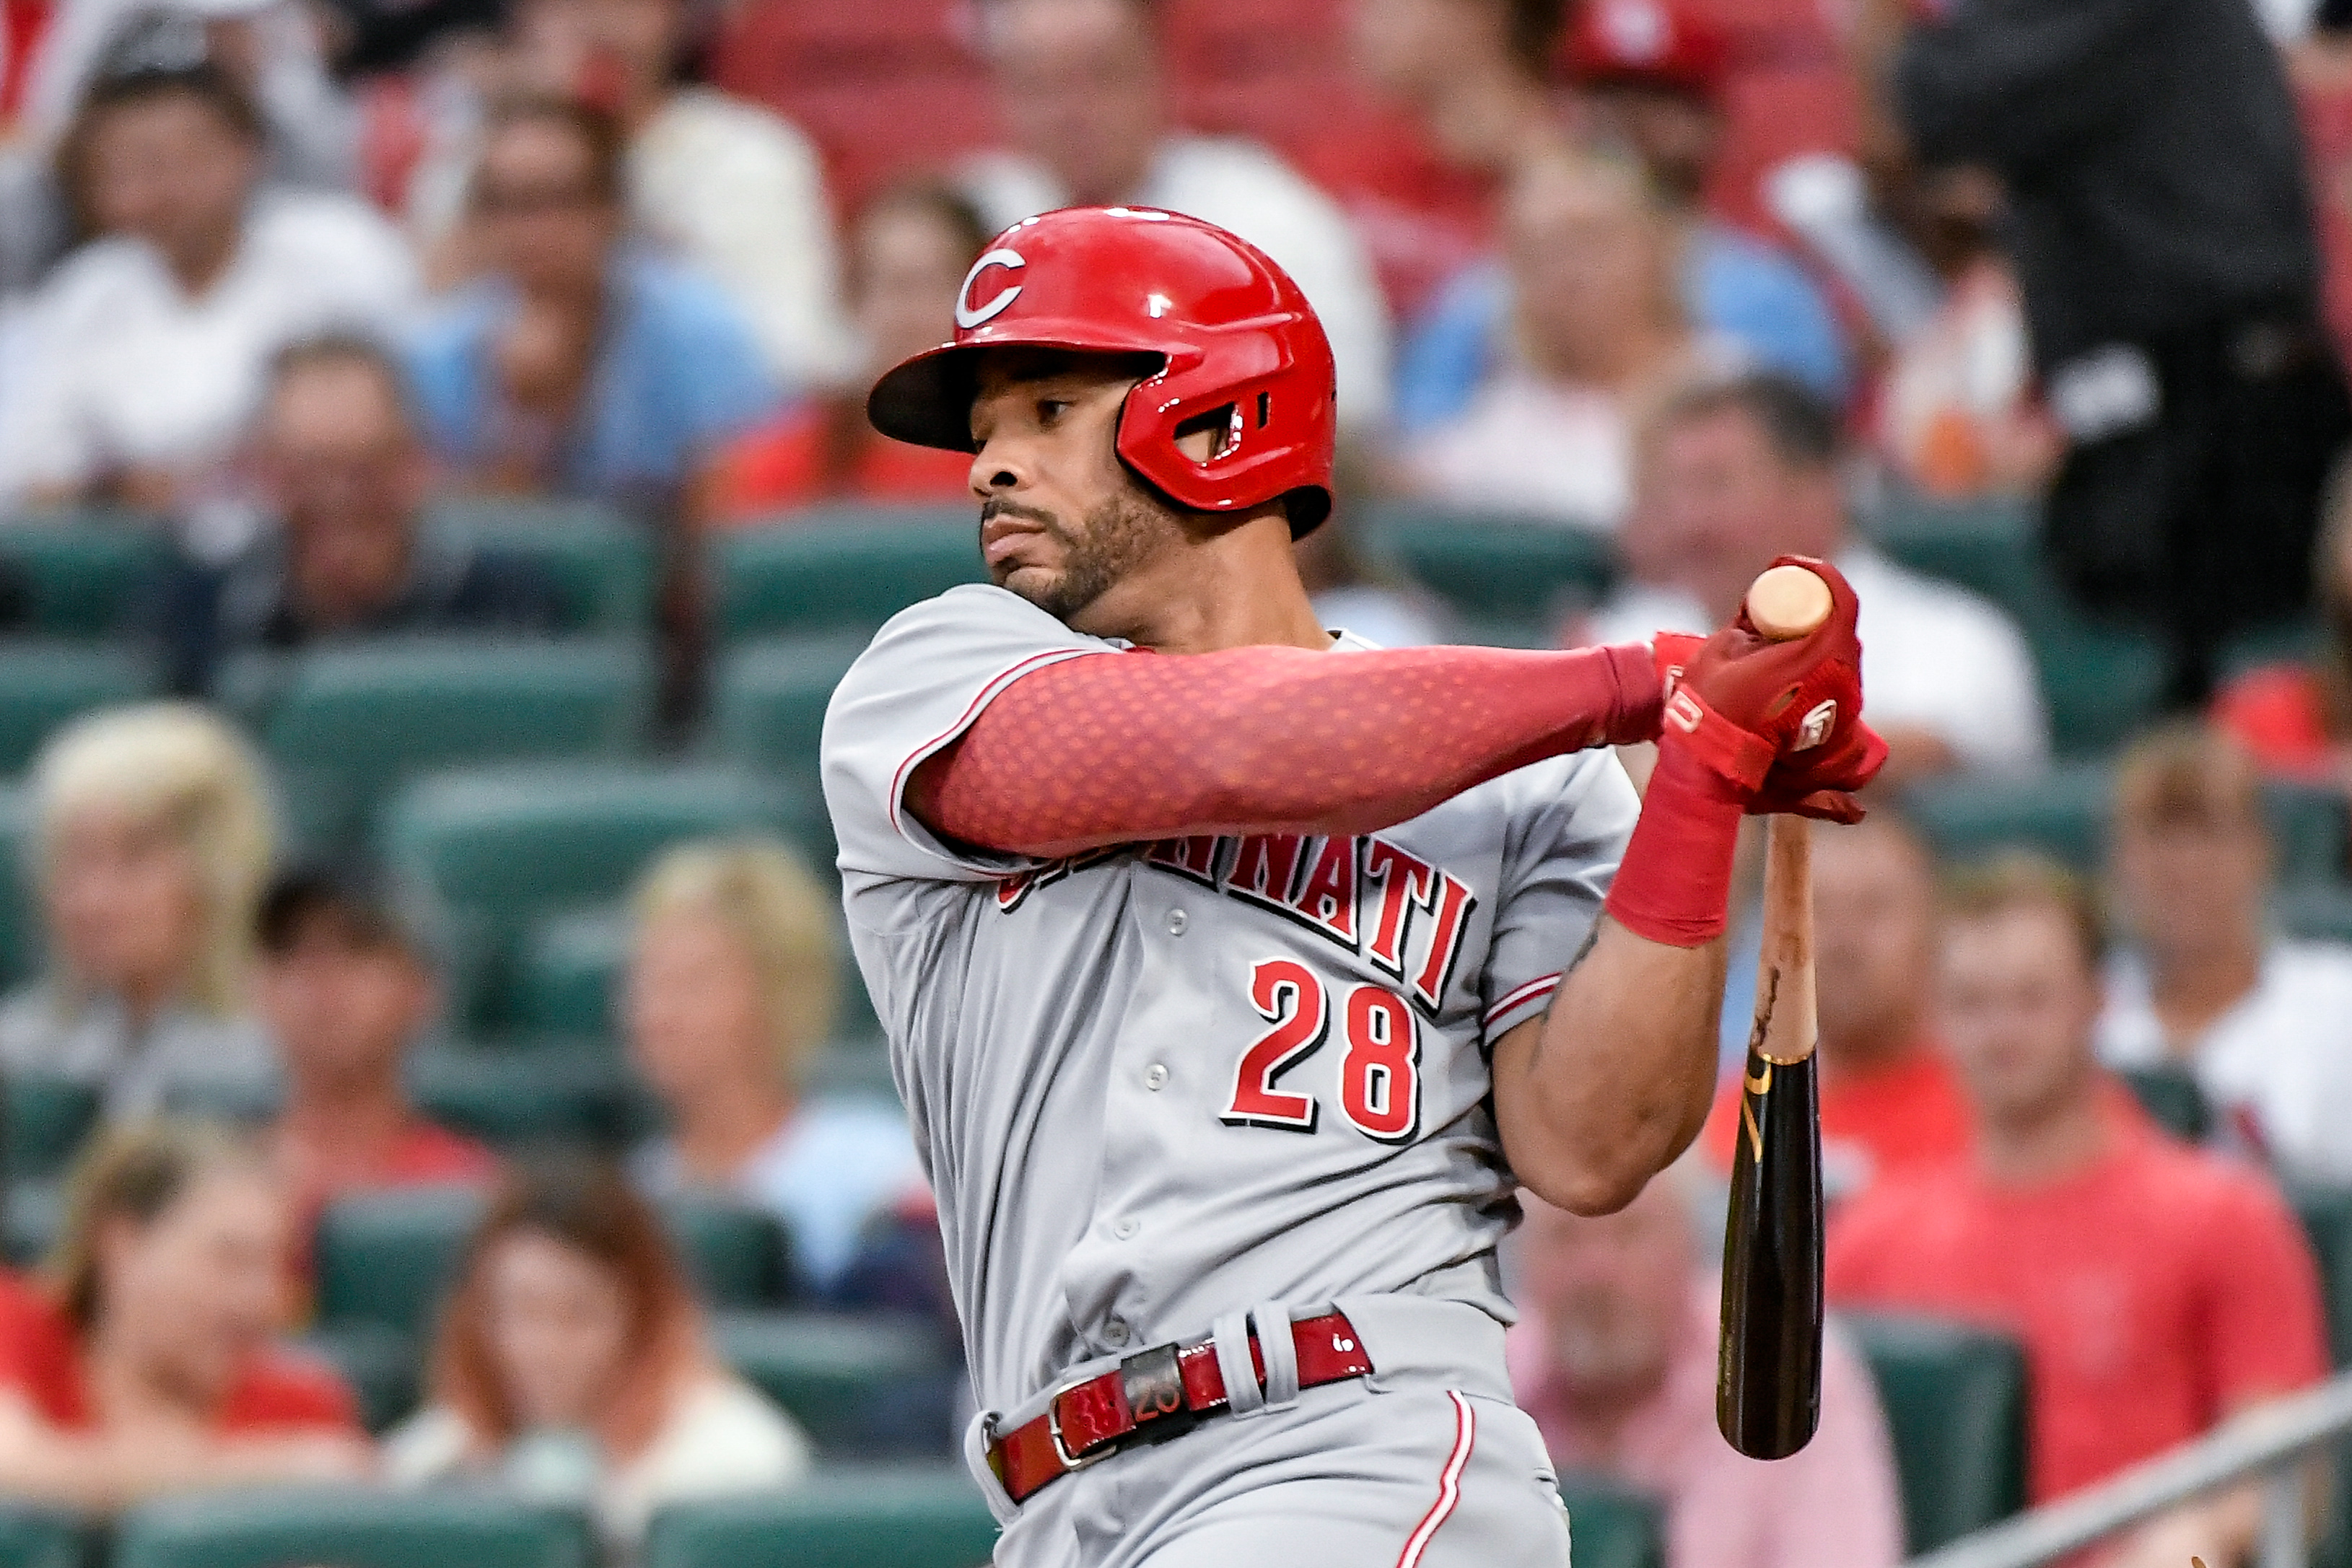 Tommy Pham says Giants' Pederson lied, Trout at fault for slap